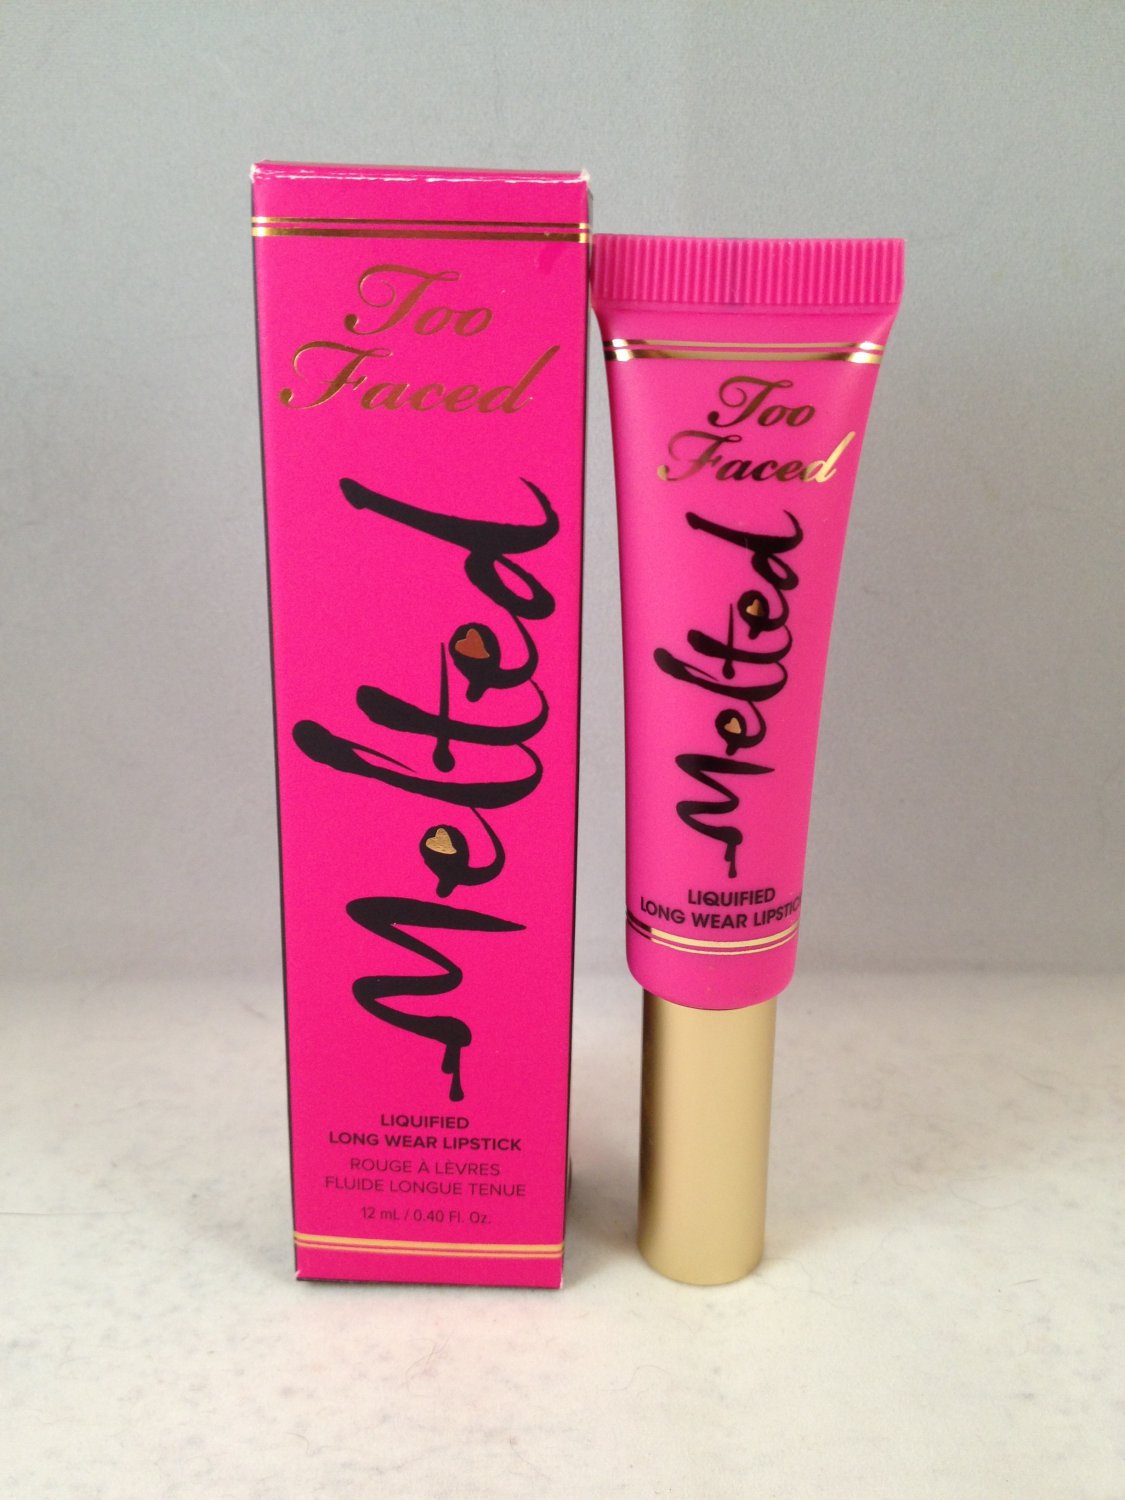 Too Faced Melted Liquified Long Wear Lipstick Melted Fuchsia liquid lipcolor